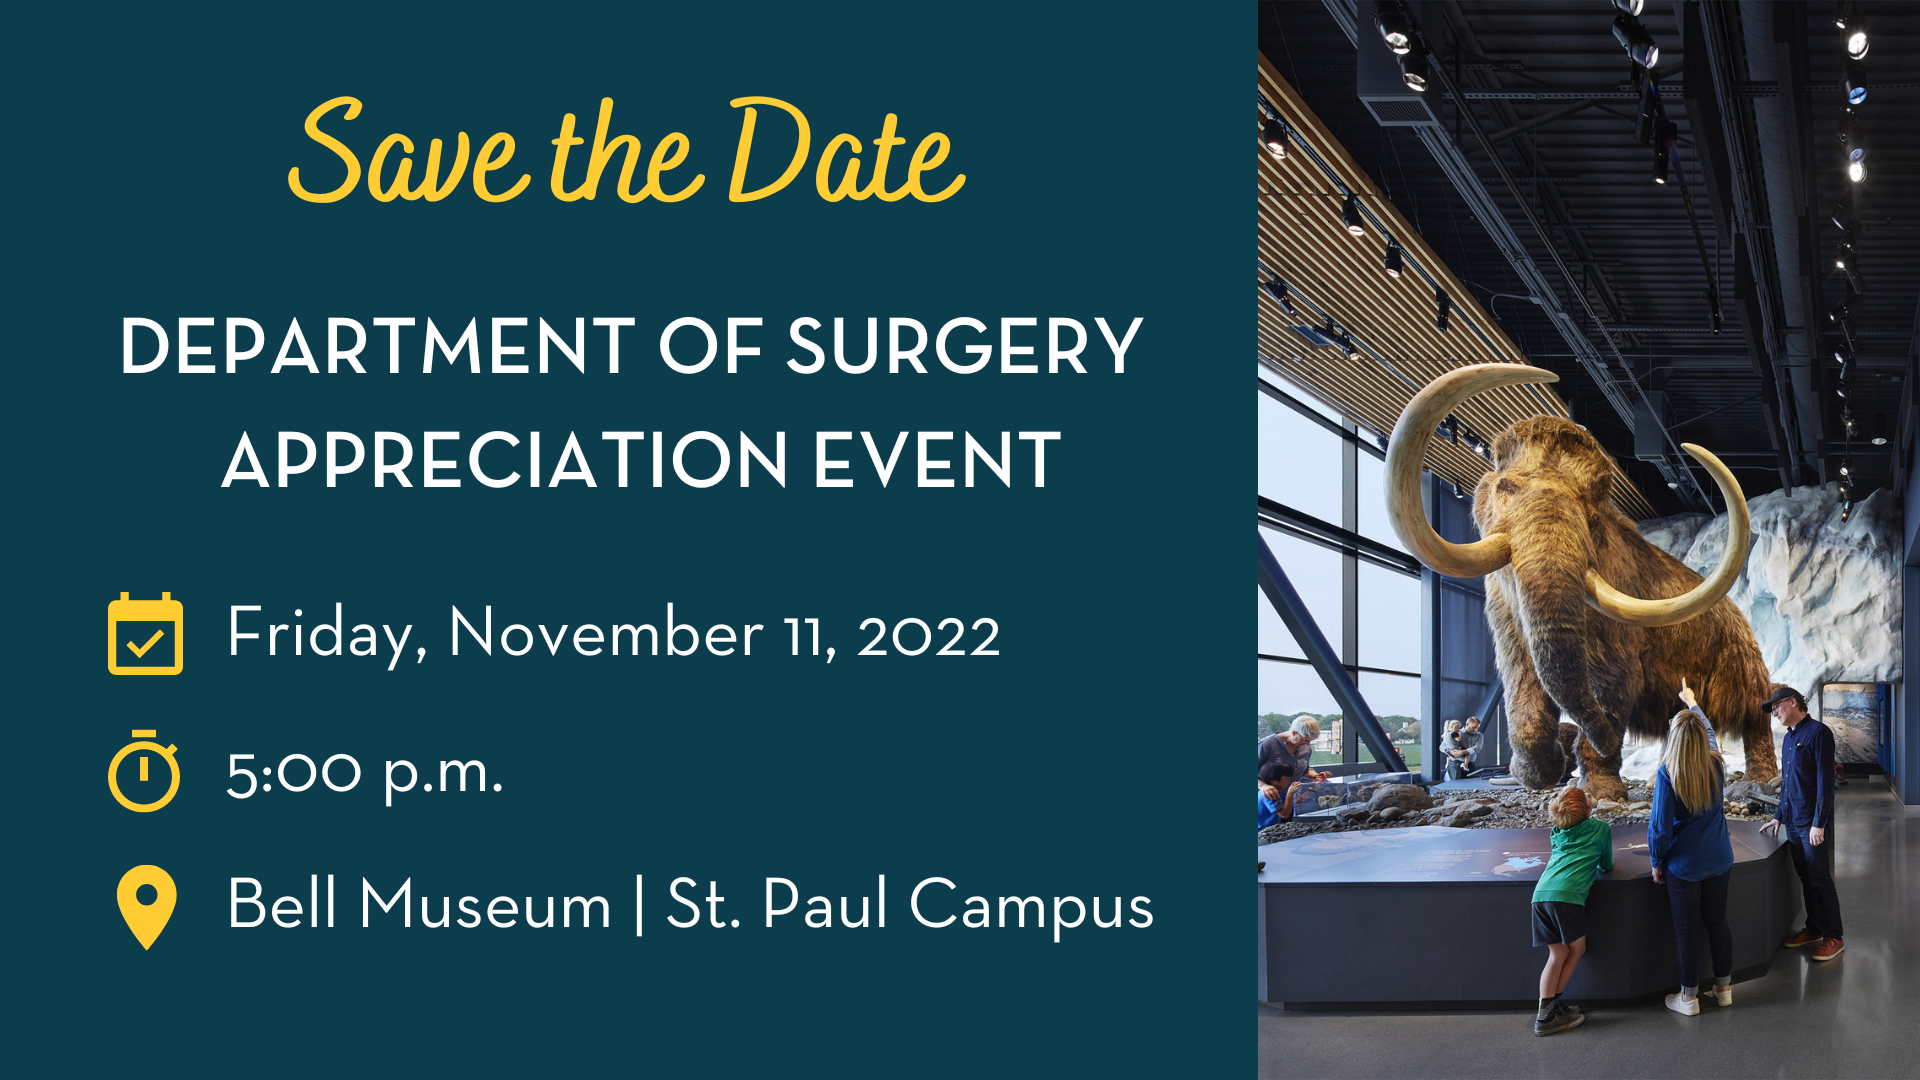 Save the Date - Department of Surgery Appreciation Event (Presentation (16:9))